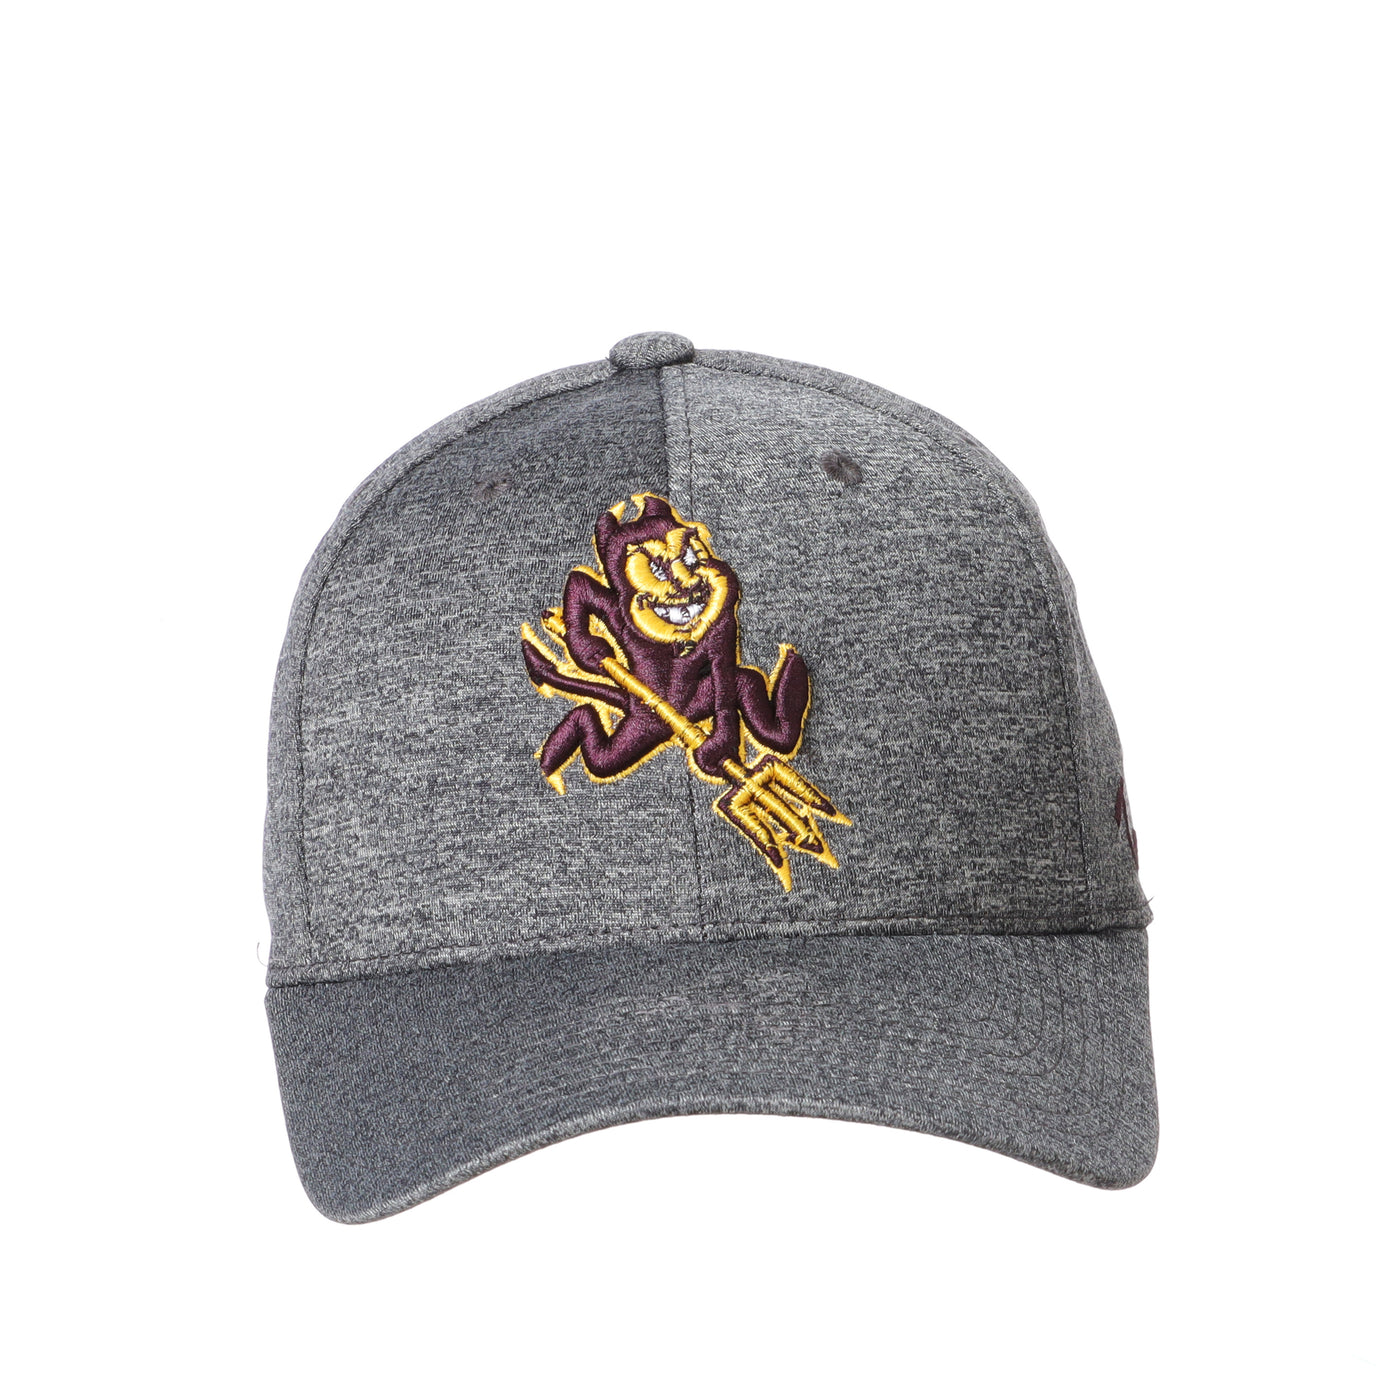 ASU heather gray hat with embroidered Sparky